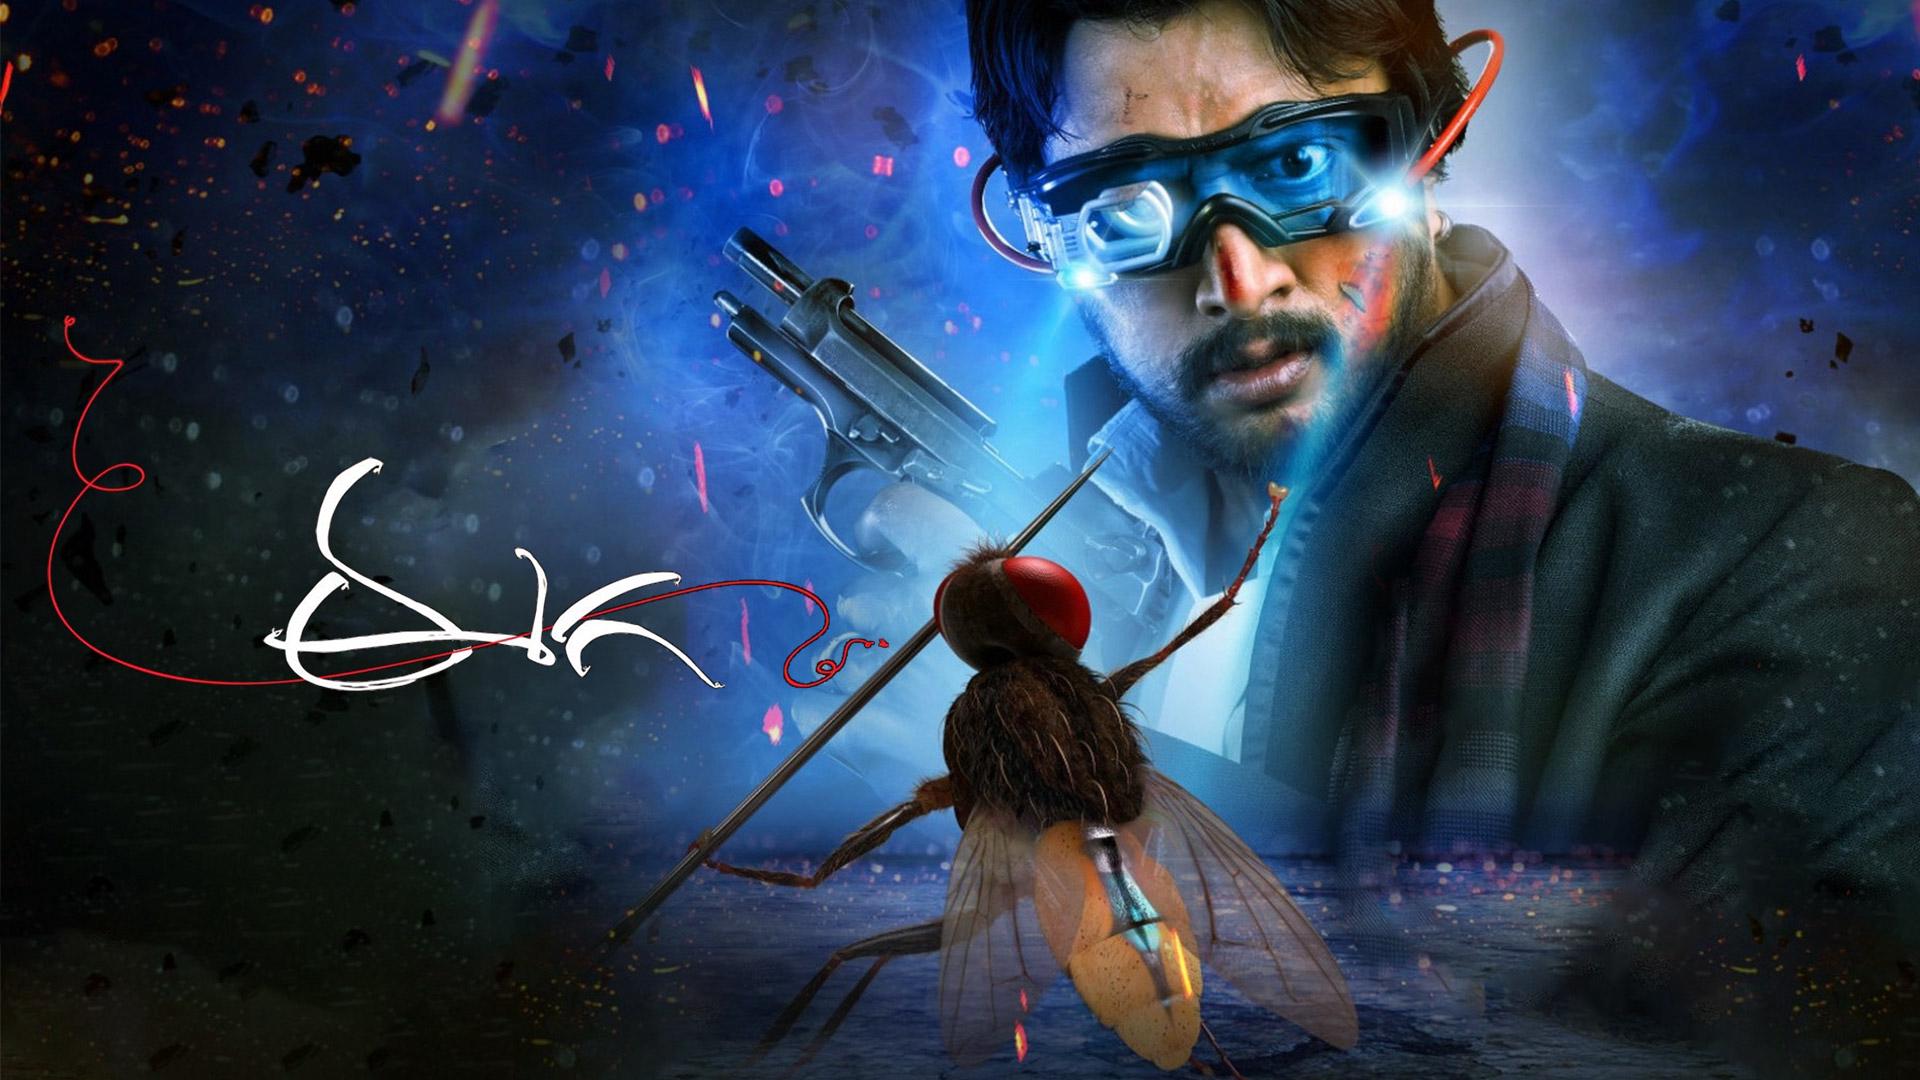 Watch Eega Full Movie Online in HD Quality | Download Now